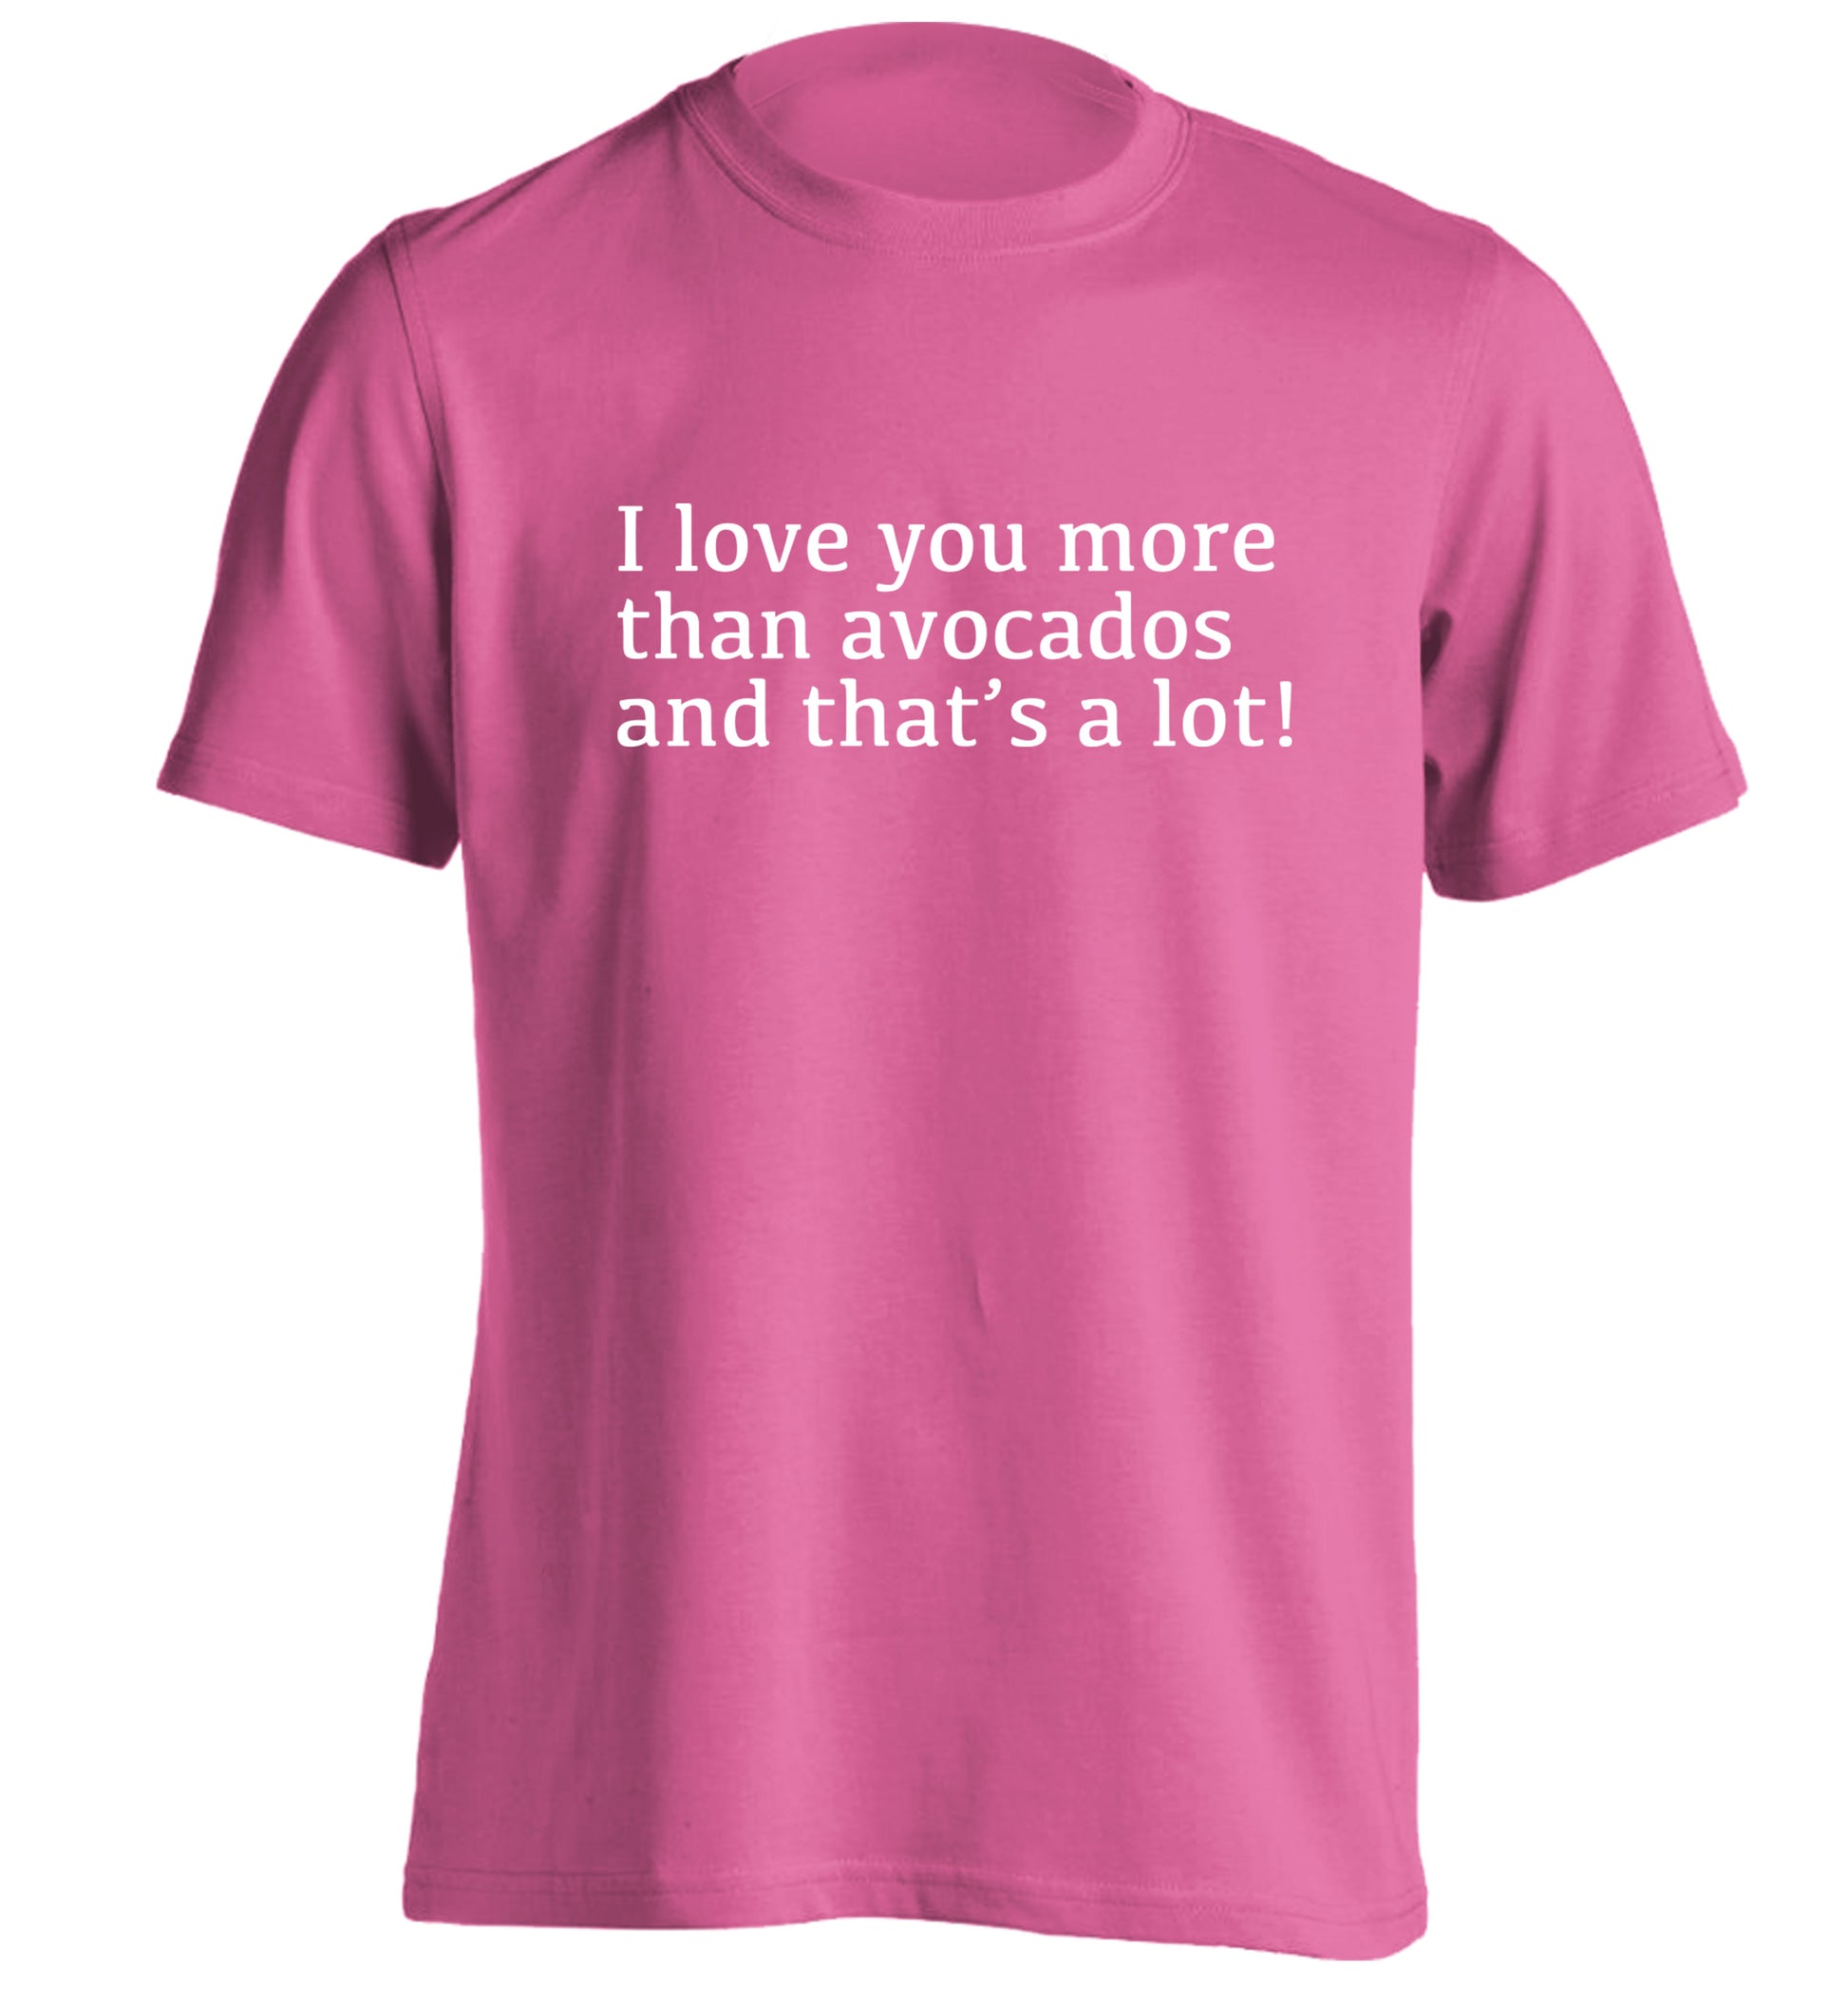 I love you more than avocados and that's a lot adults unisex pink Tshirt 2XL